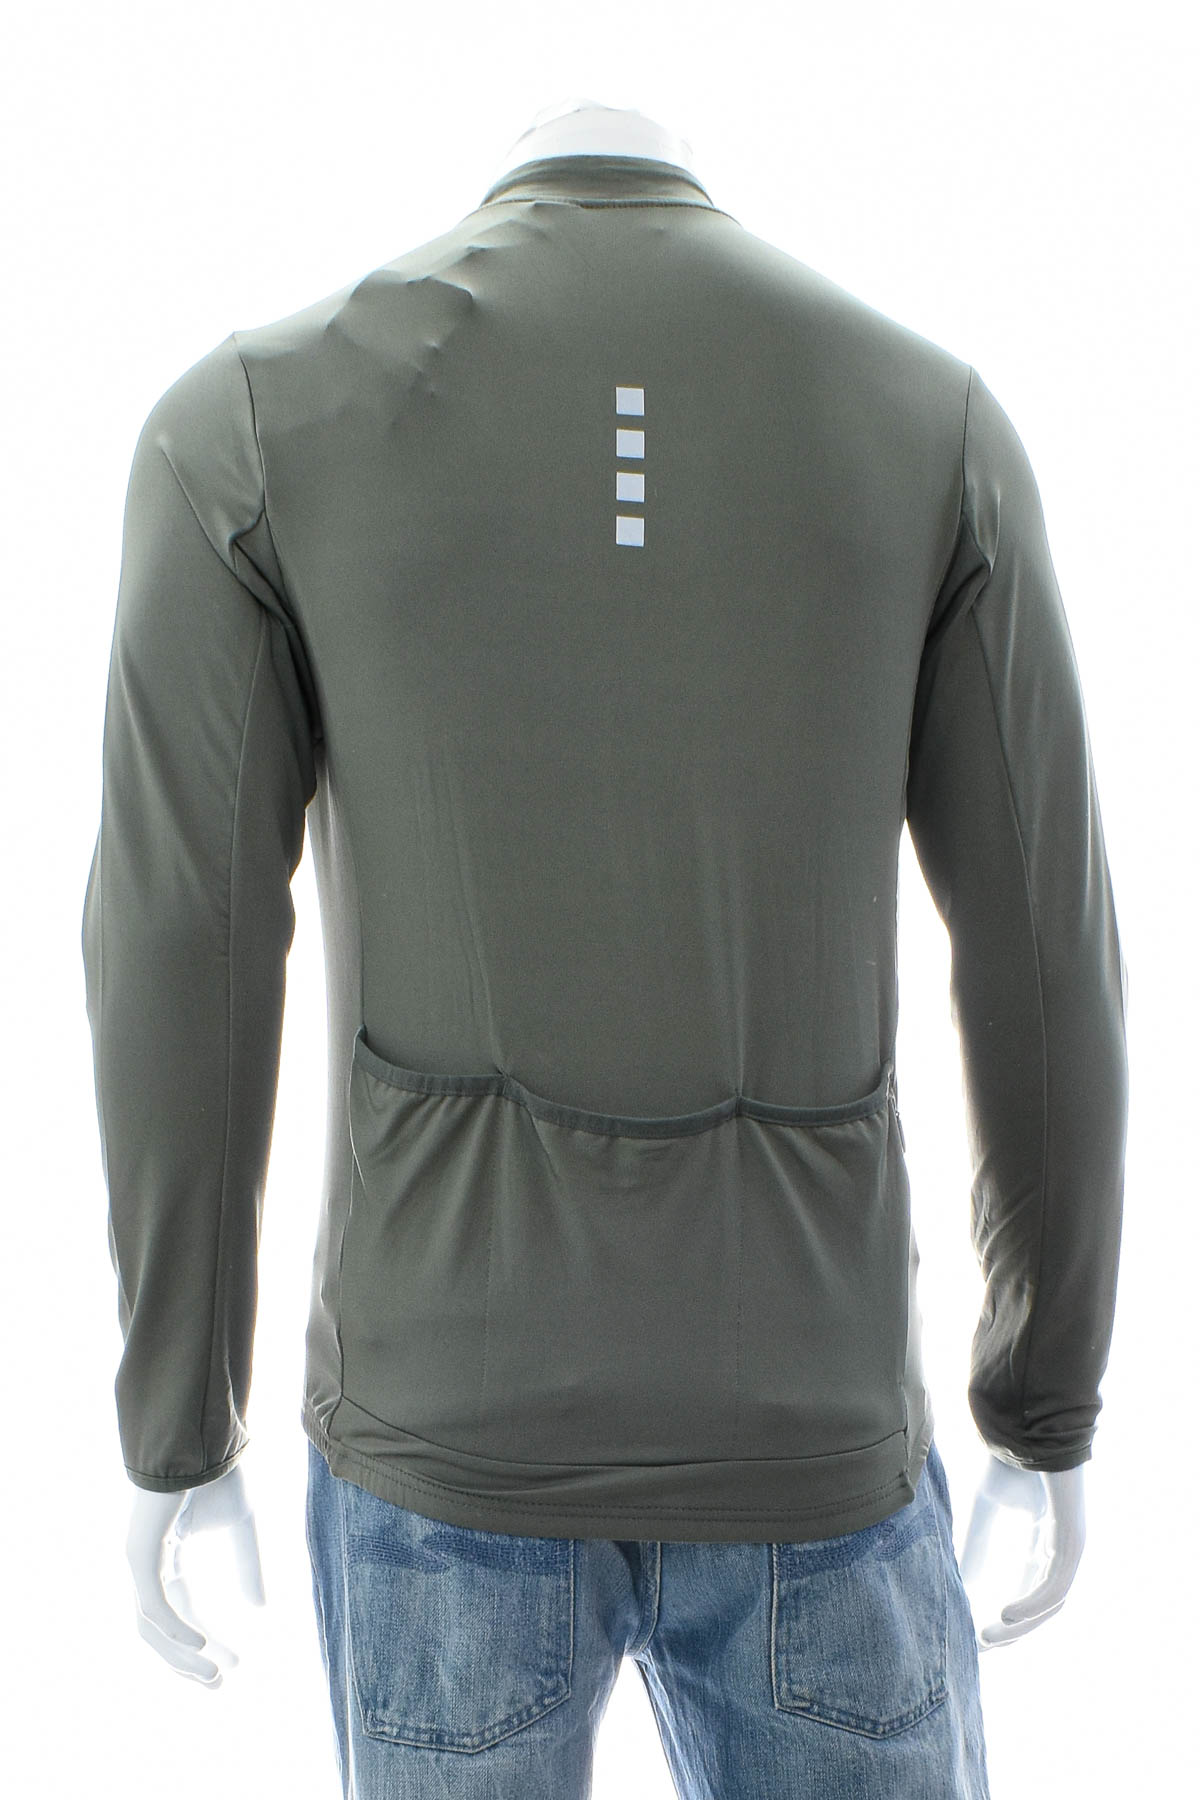 Male sports top for cycling - Crane - 1